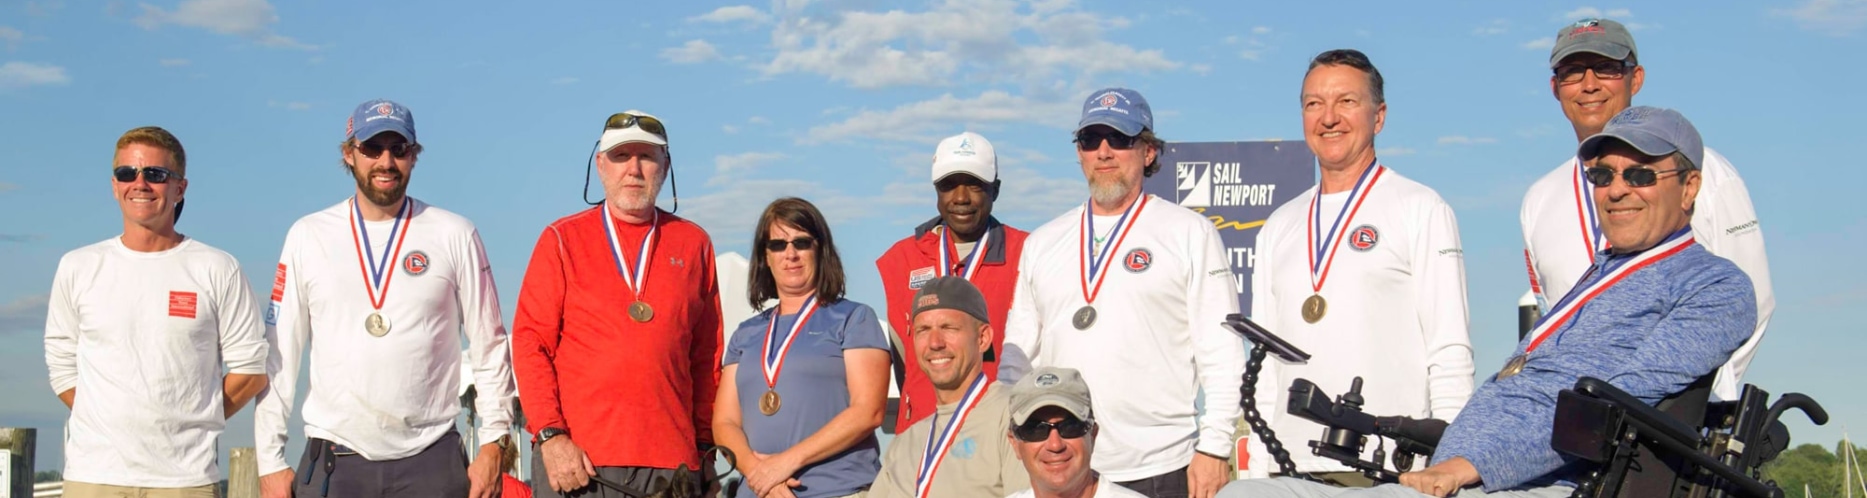 A group of Clagett Sailors at the Clagett Regatta, sailors are wearing medals and smiling